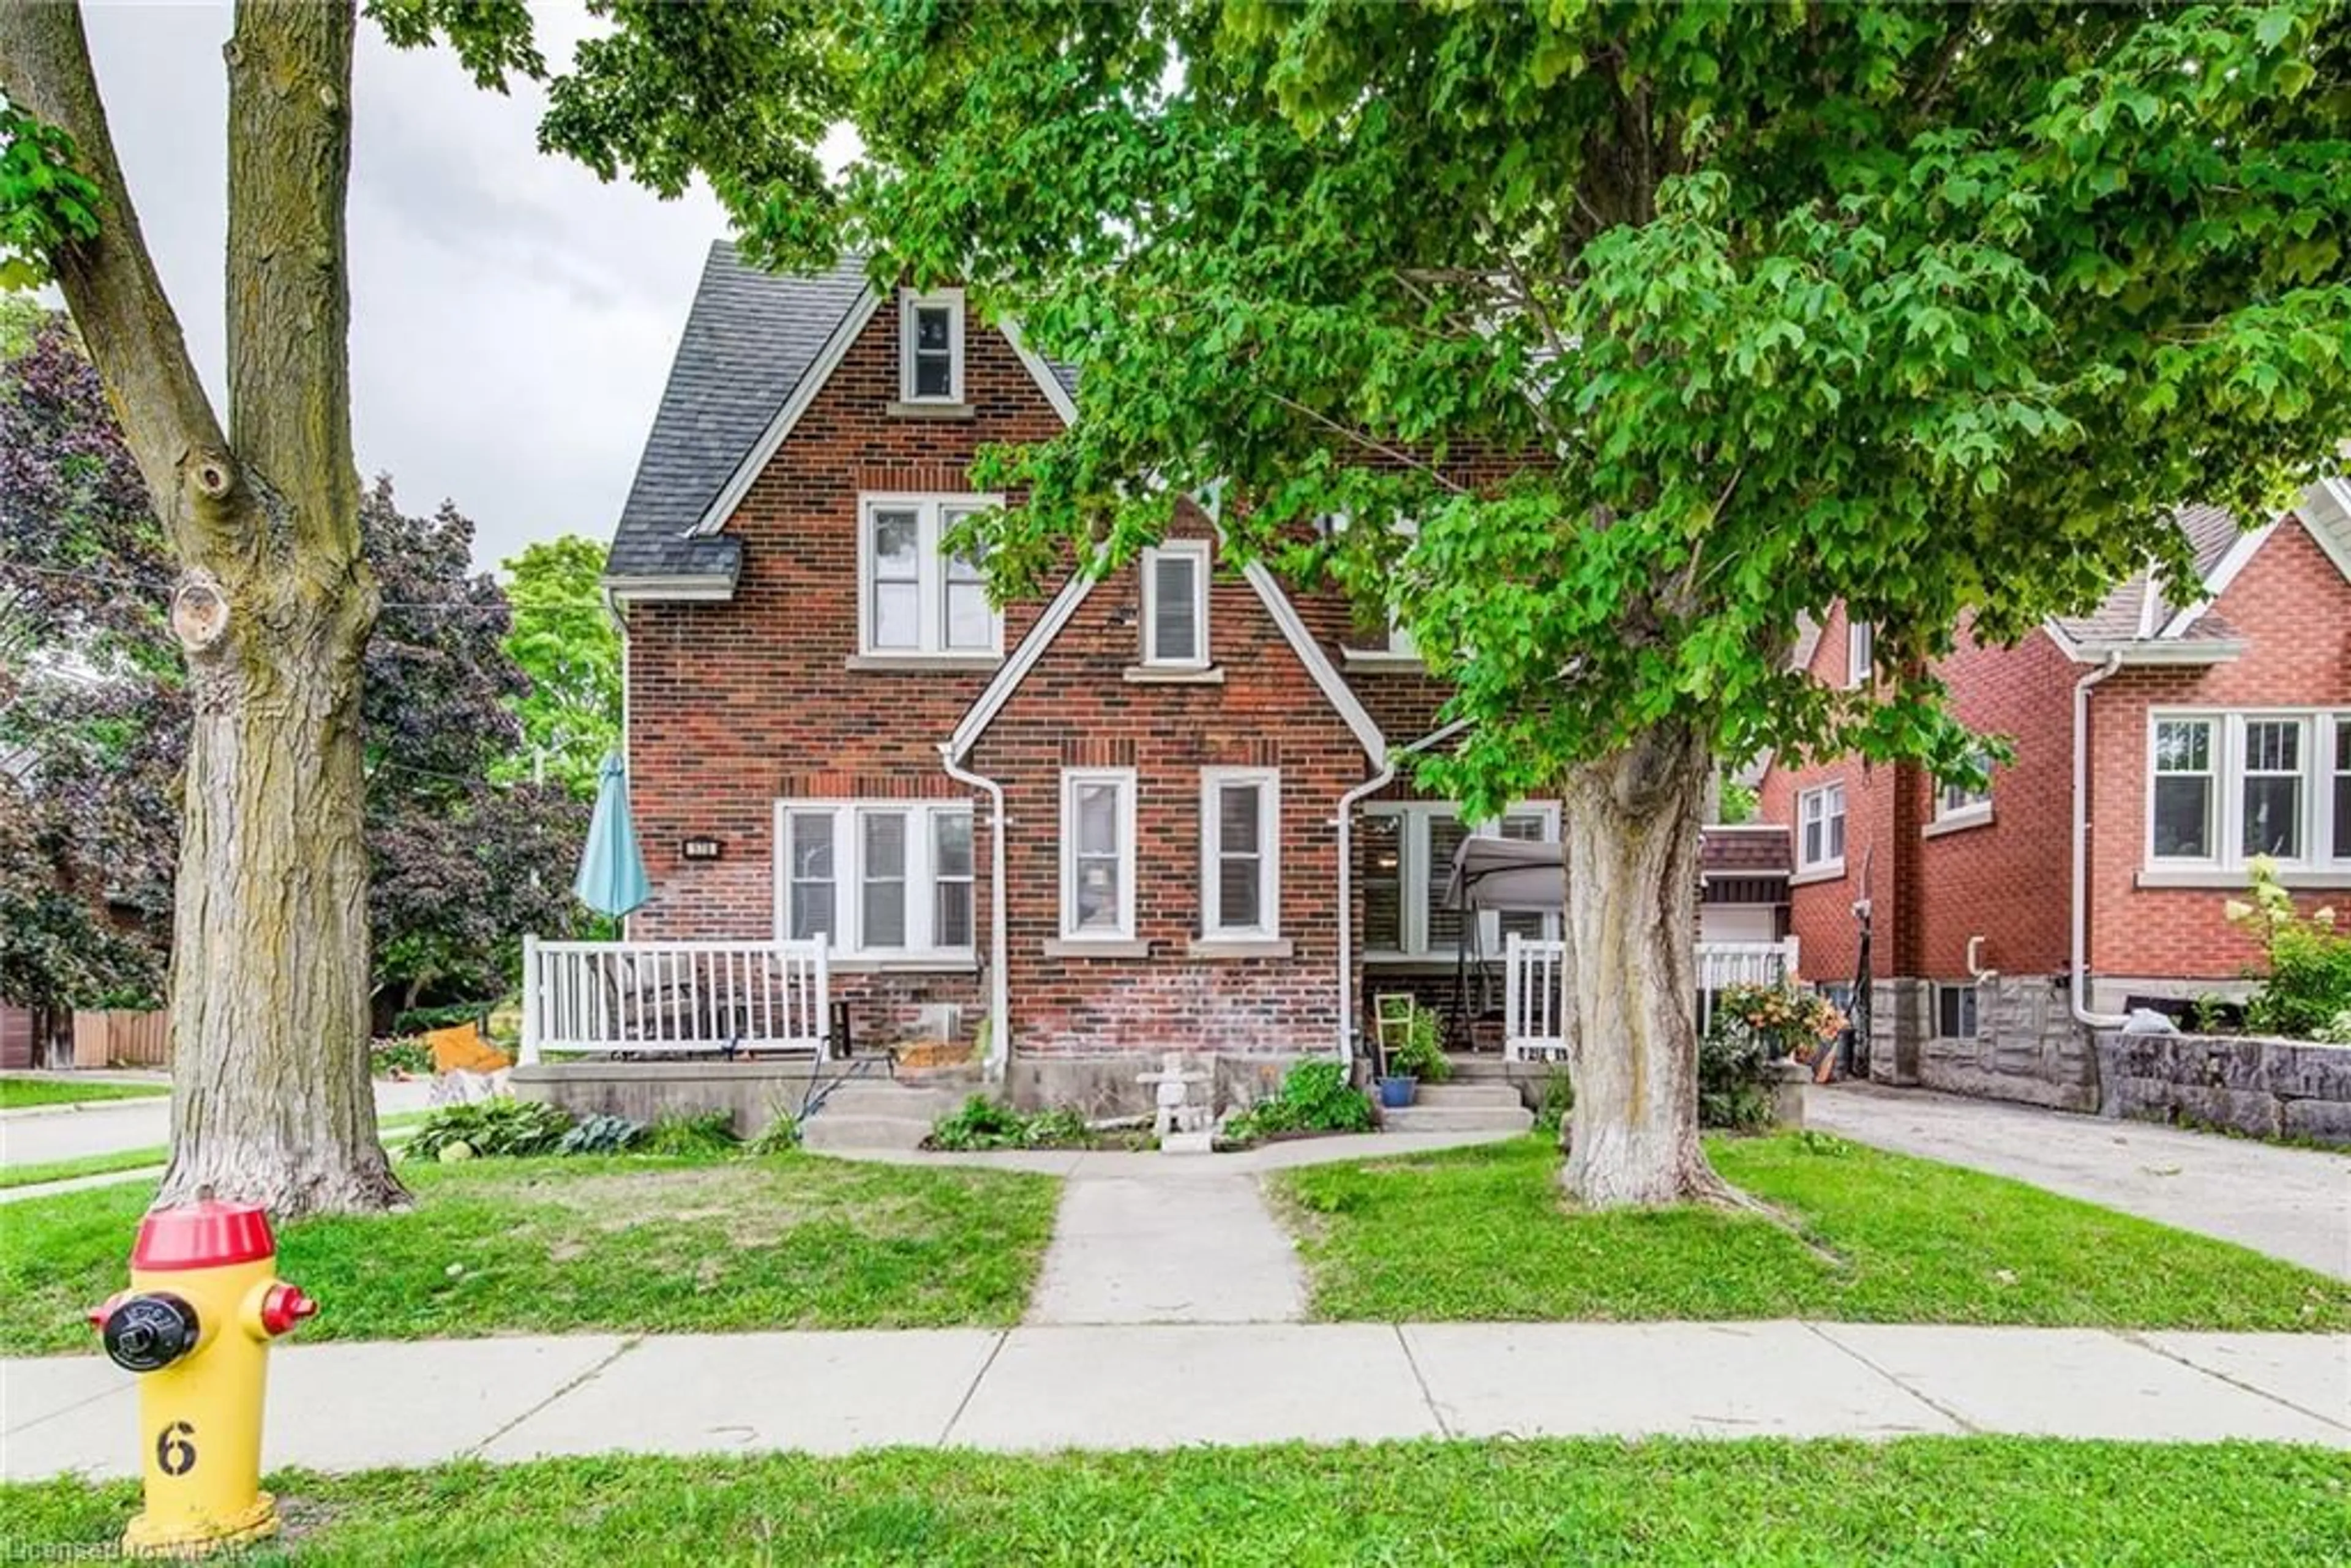 Home with brick exterior material for 178-180 Samuel St, Kitchener Ontario N2H 1R3